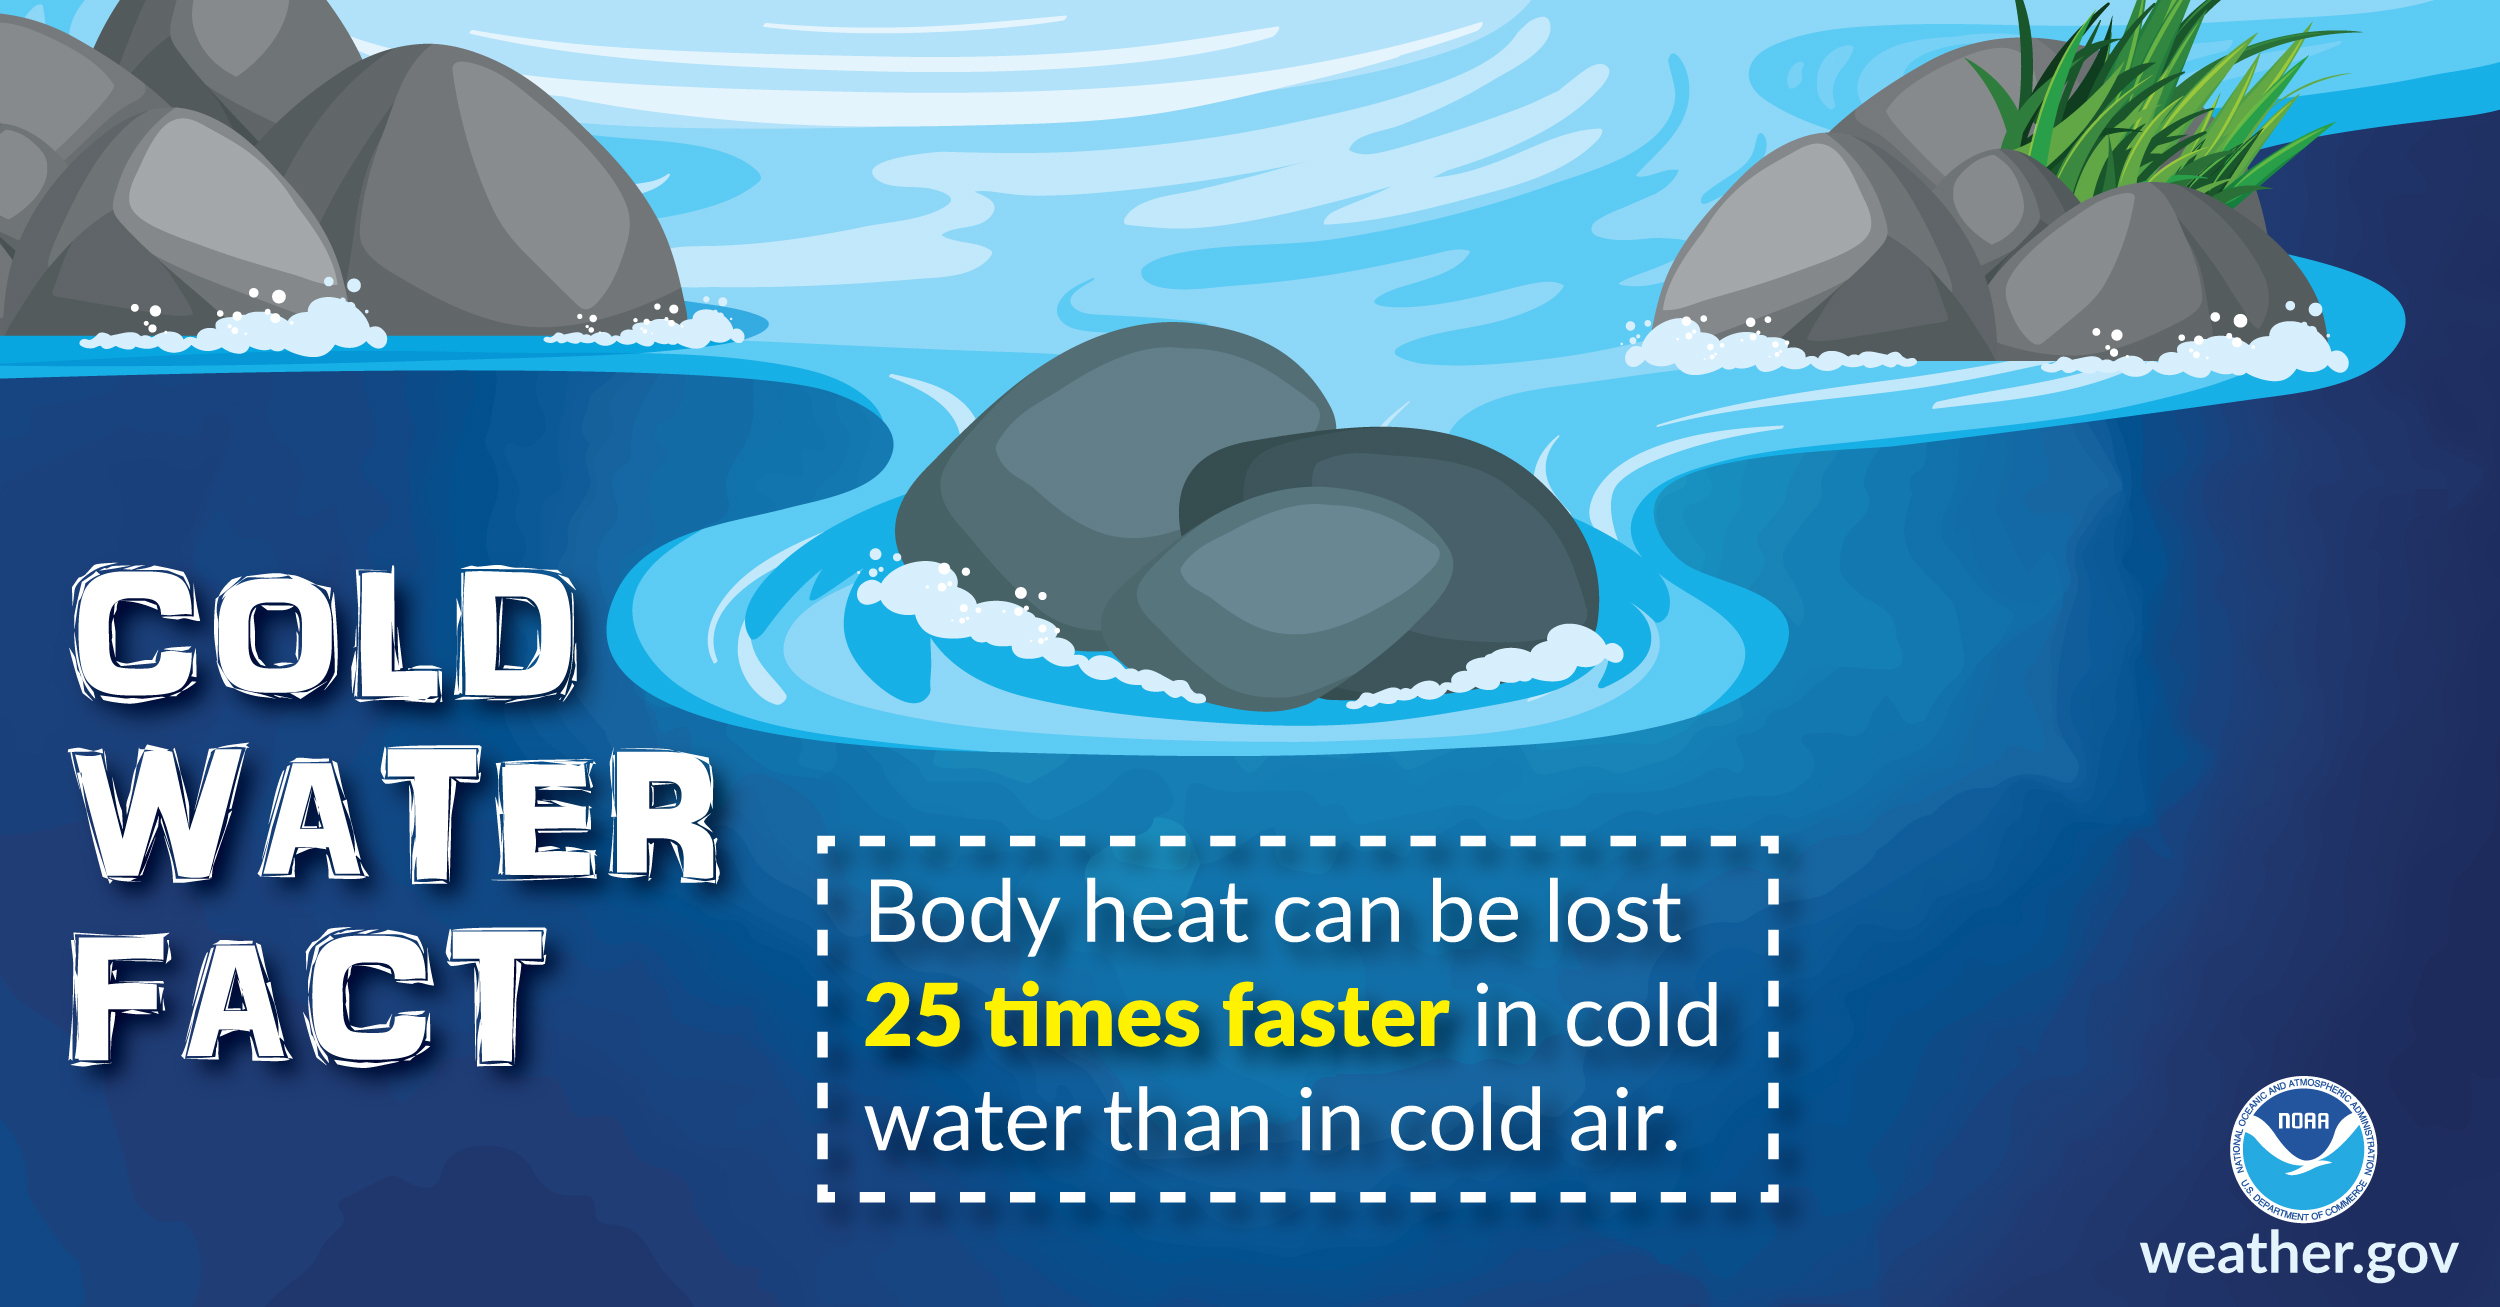 Cold Water Fact: body heat can be lost 25 times faster in cold water than in cold air.